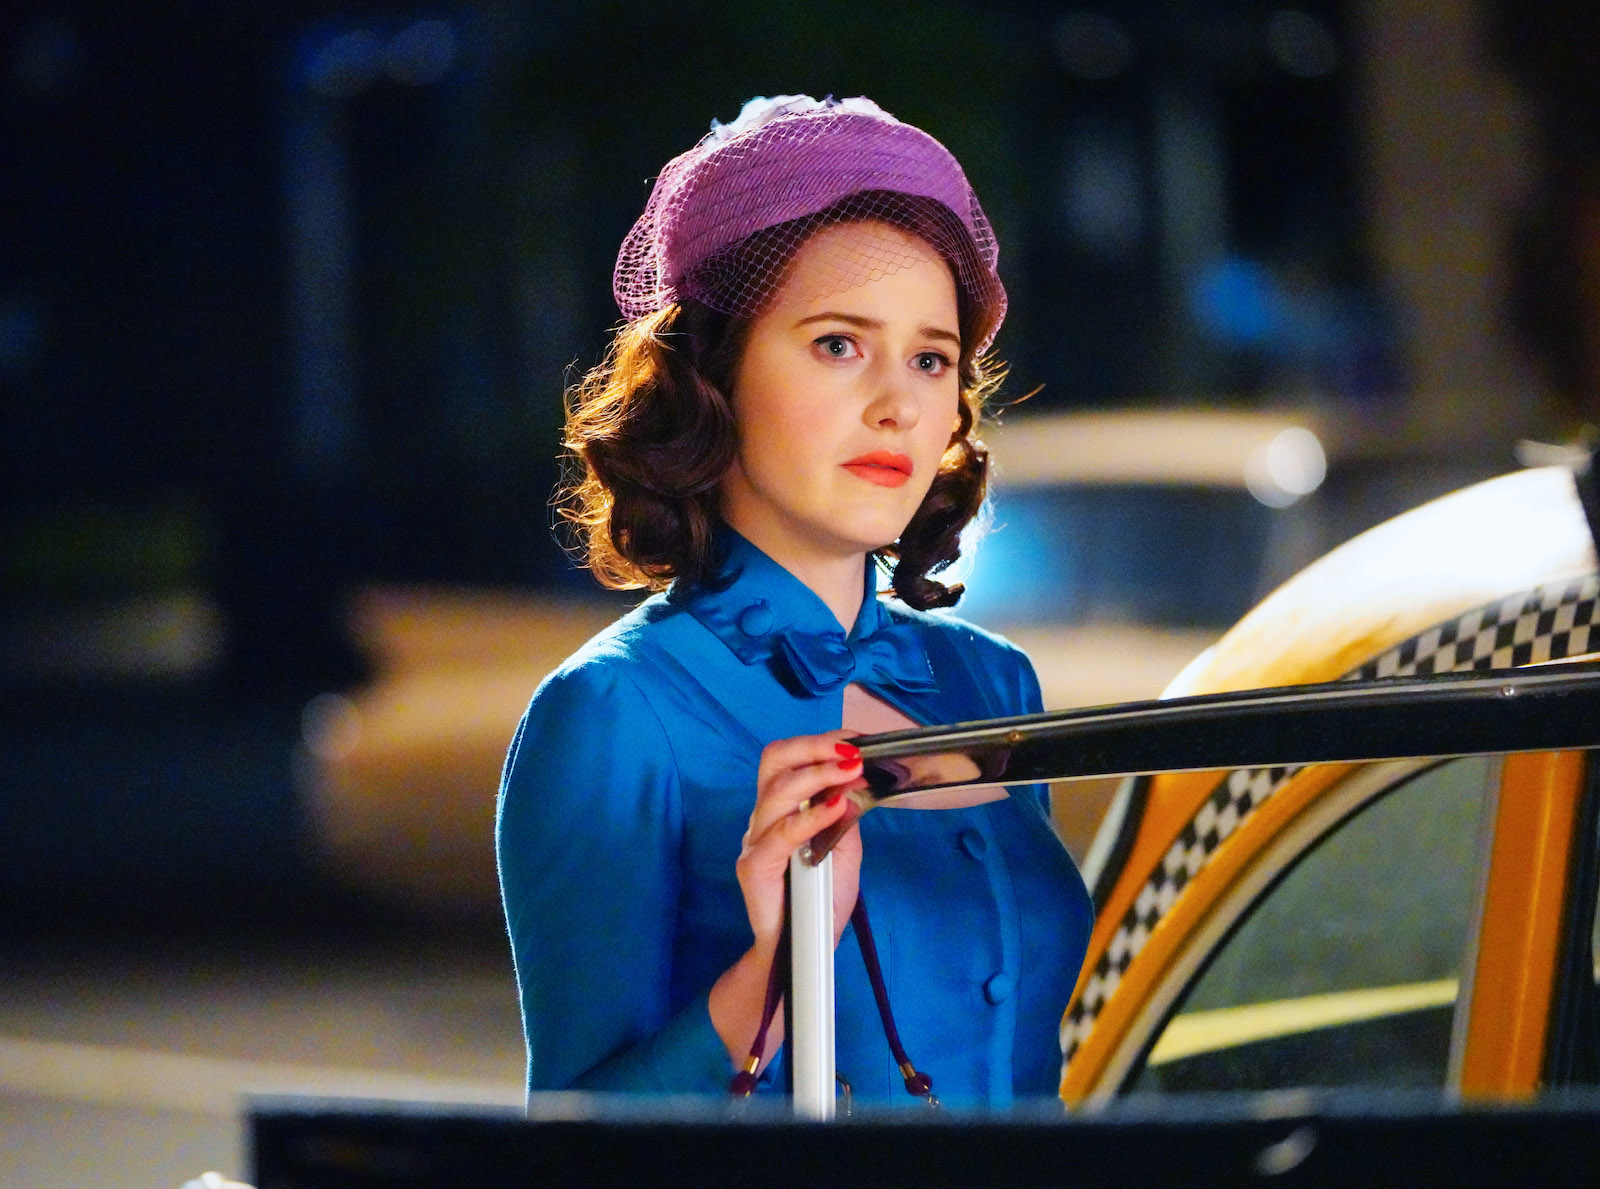 Rachel Brosnahan who plays Midge Maisel on 'The Marvelous Mrs. Maisel' stands in front of a cab